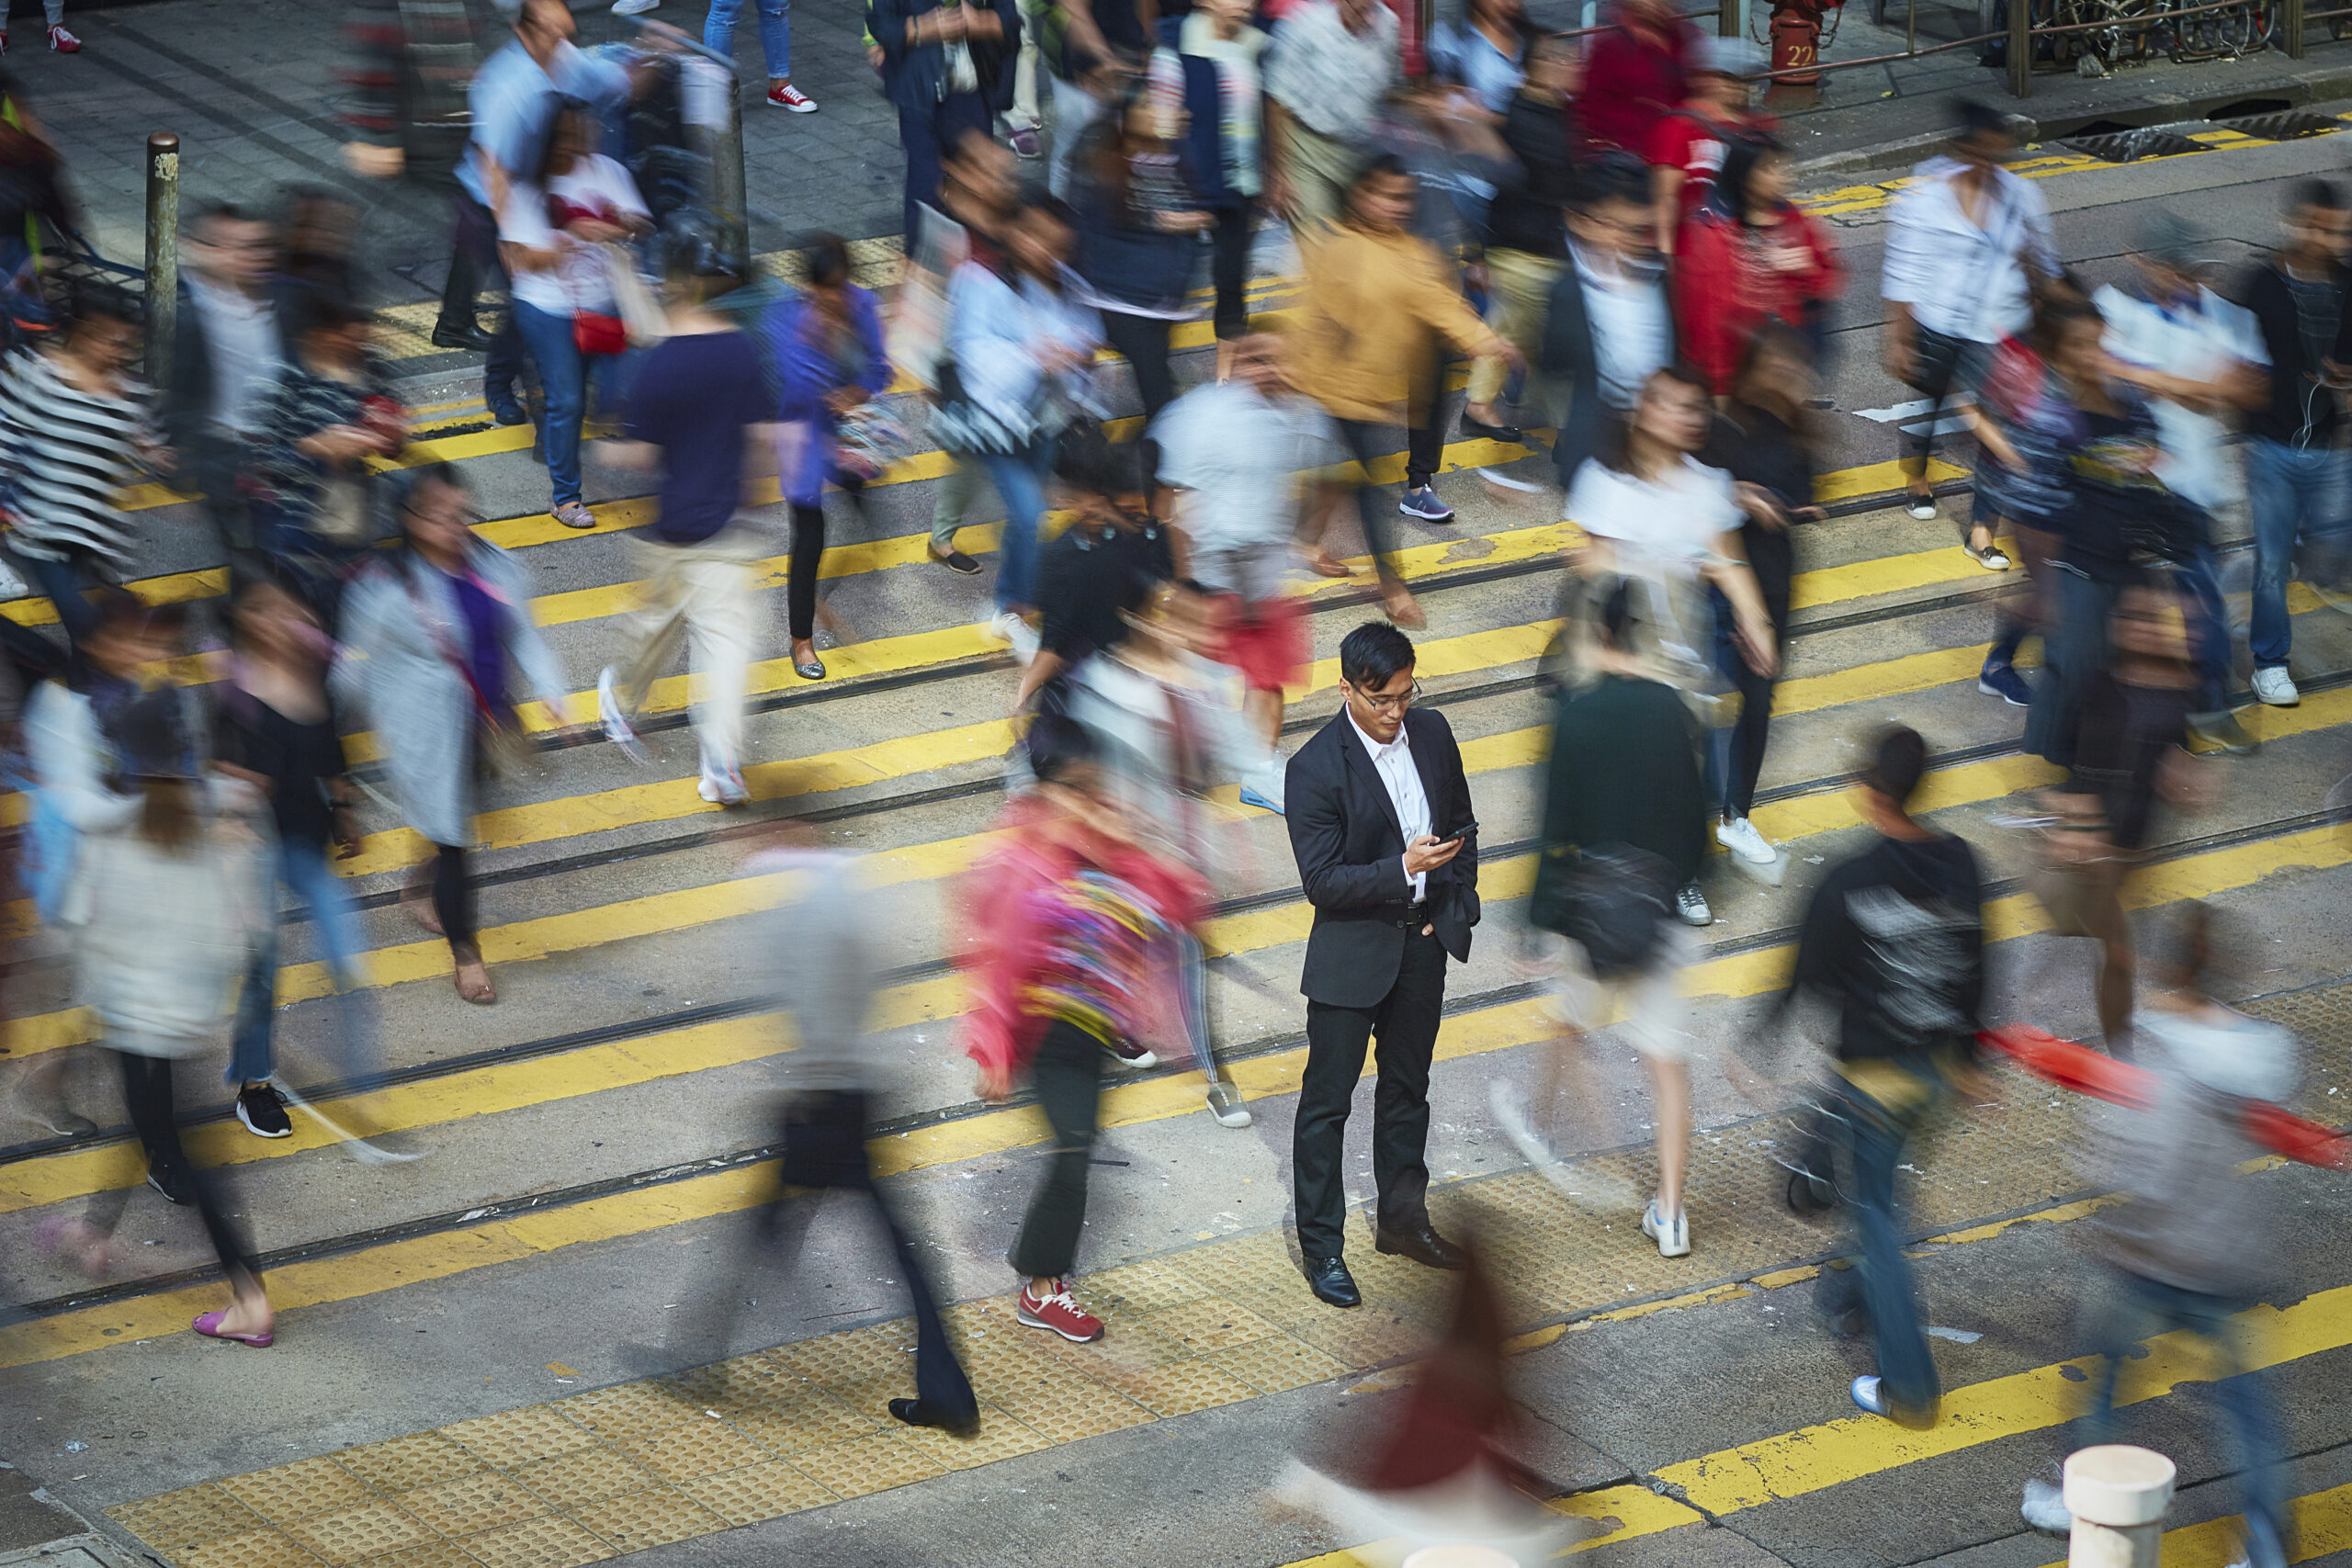 Motion-blurred view of people in a busy crosswalk. A single businessman stands stationary in the middle.